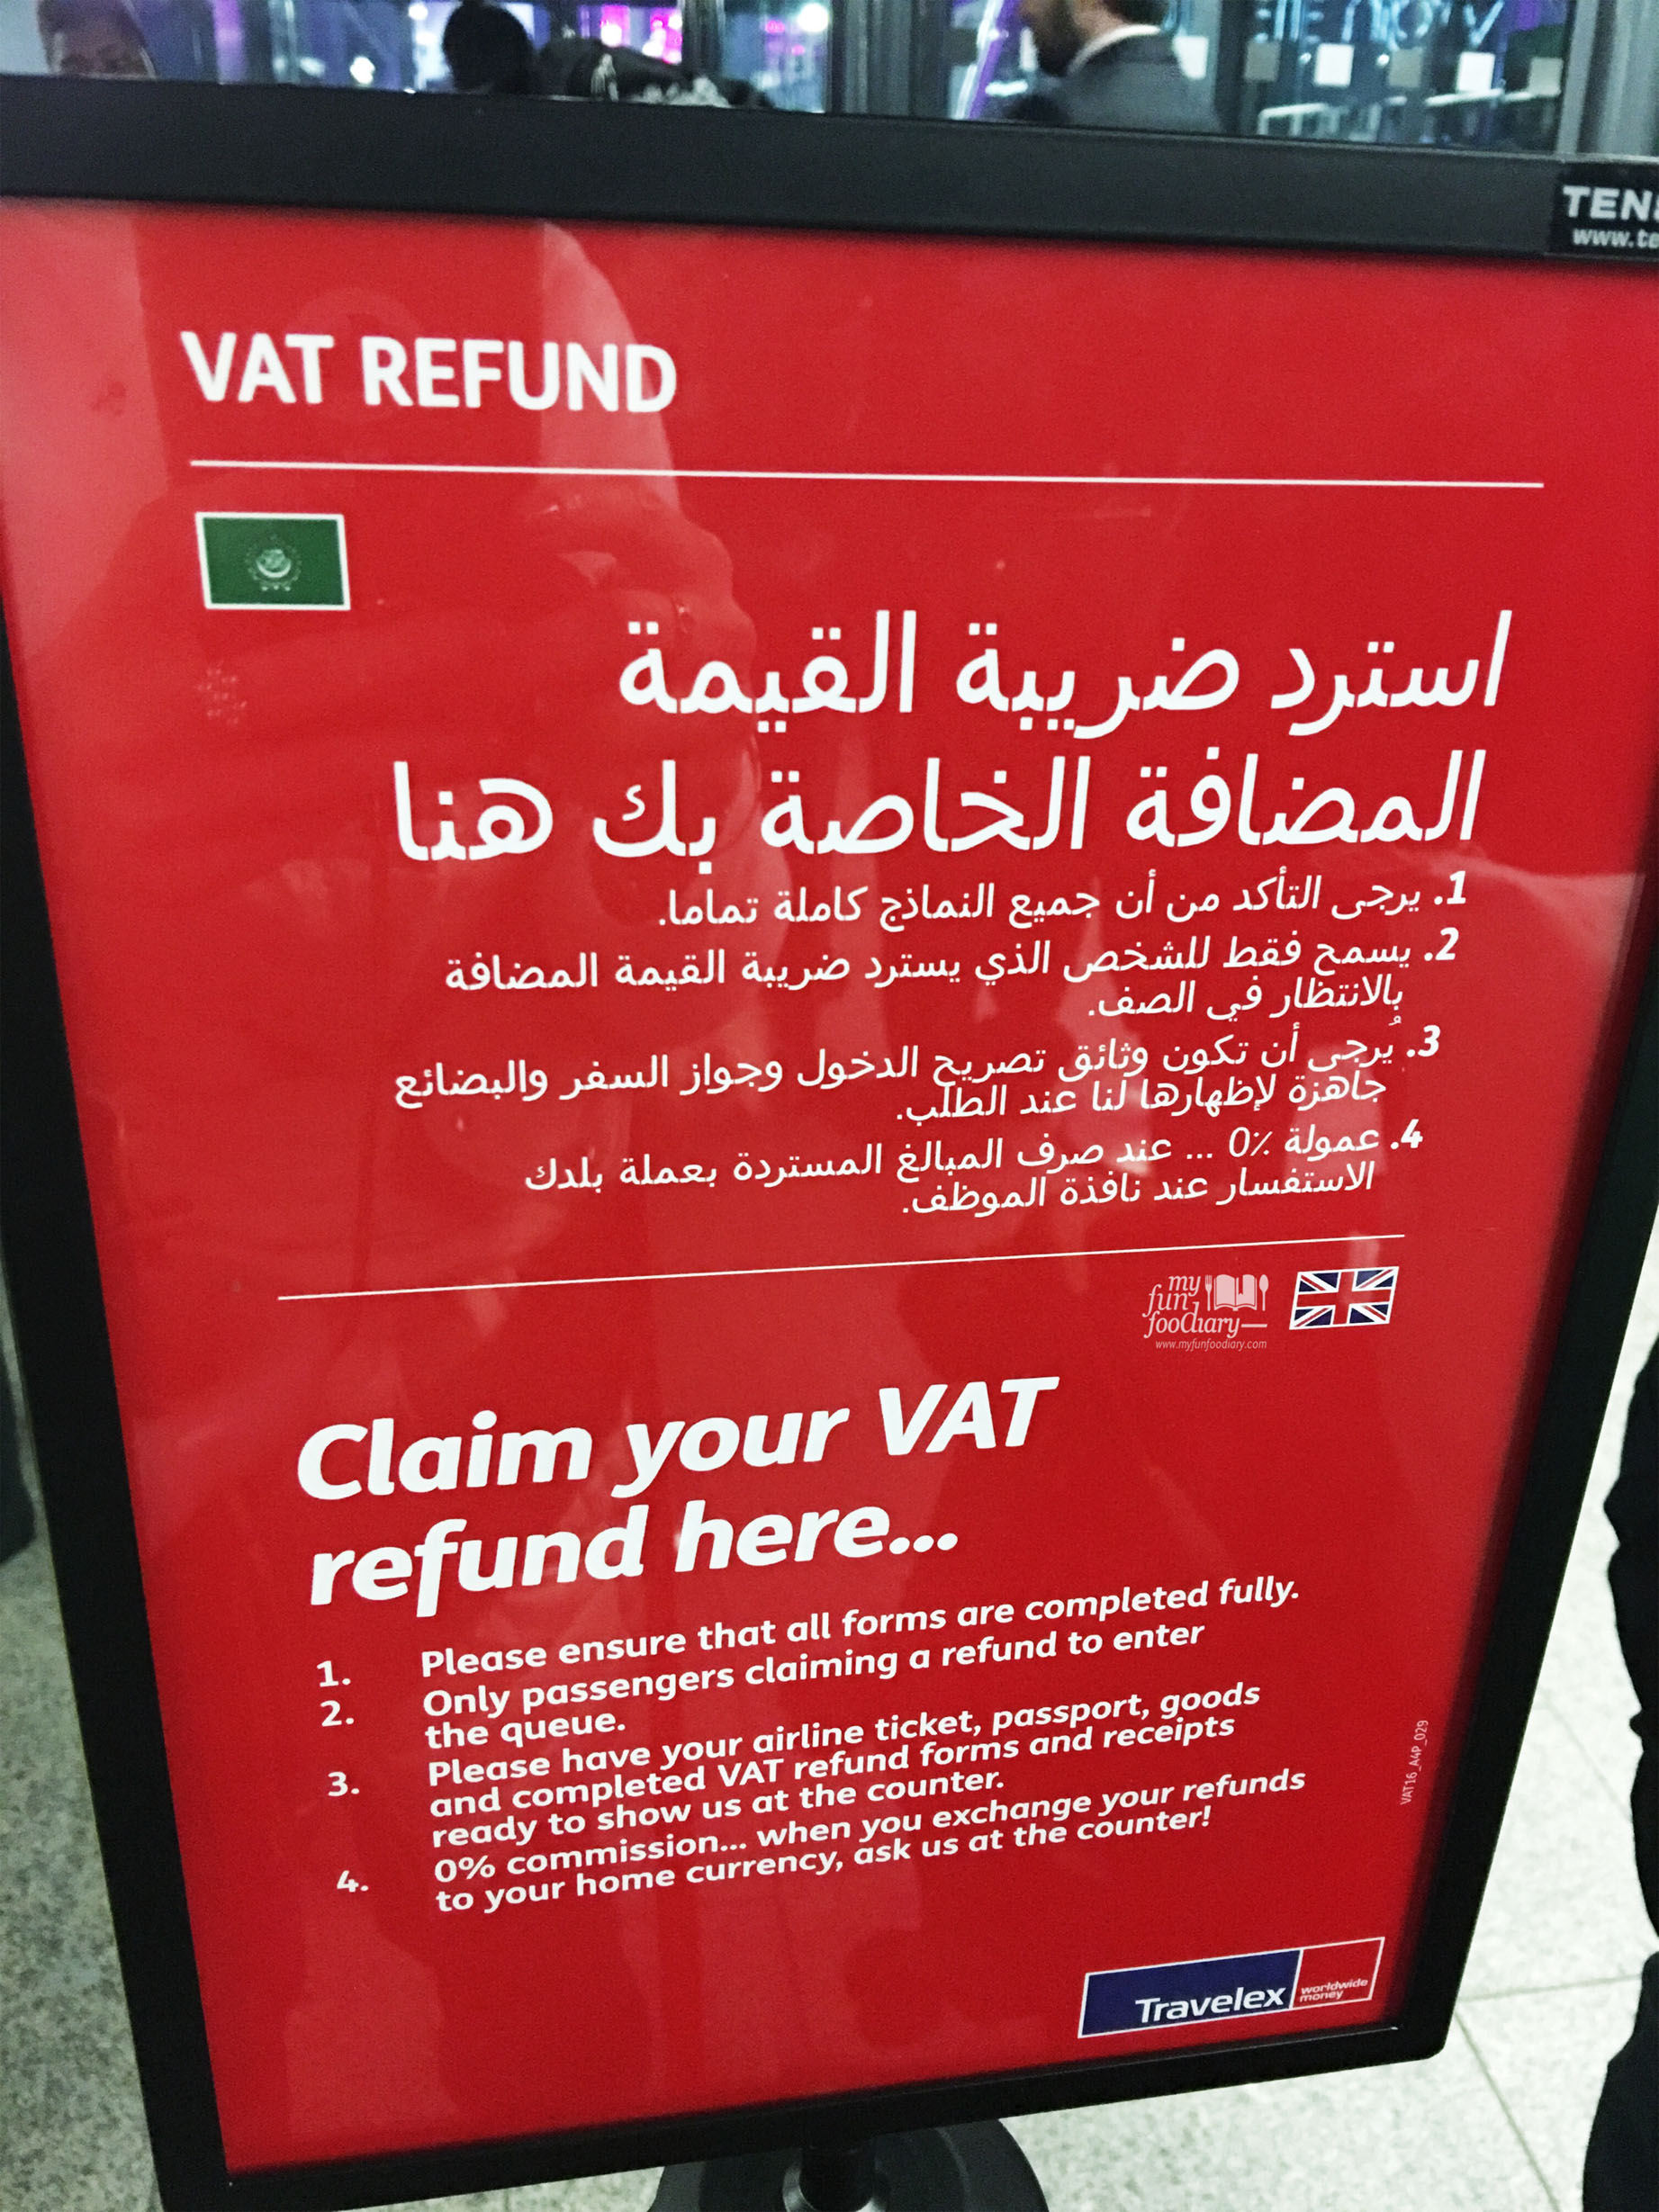 Claim your VAT Refund here at Heathrow Airport, London